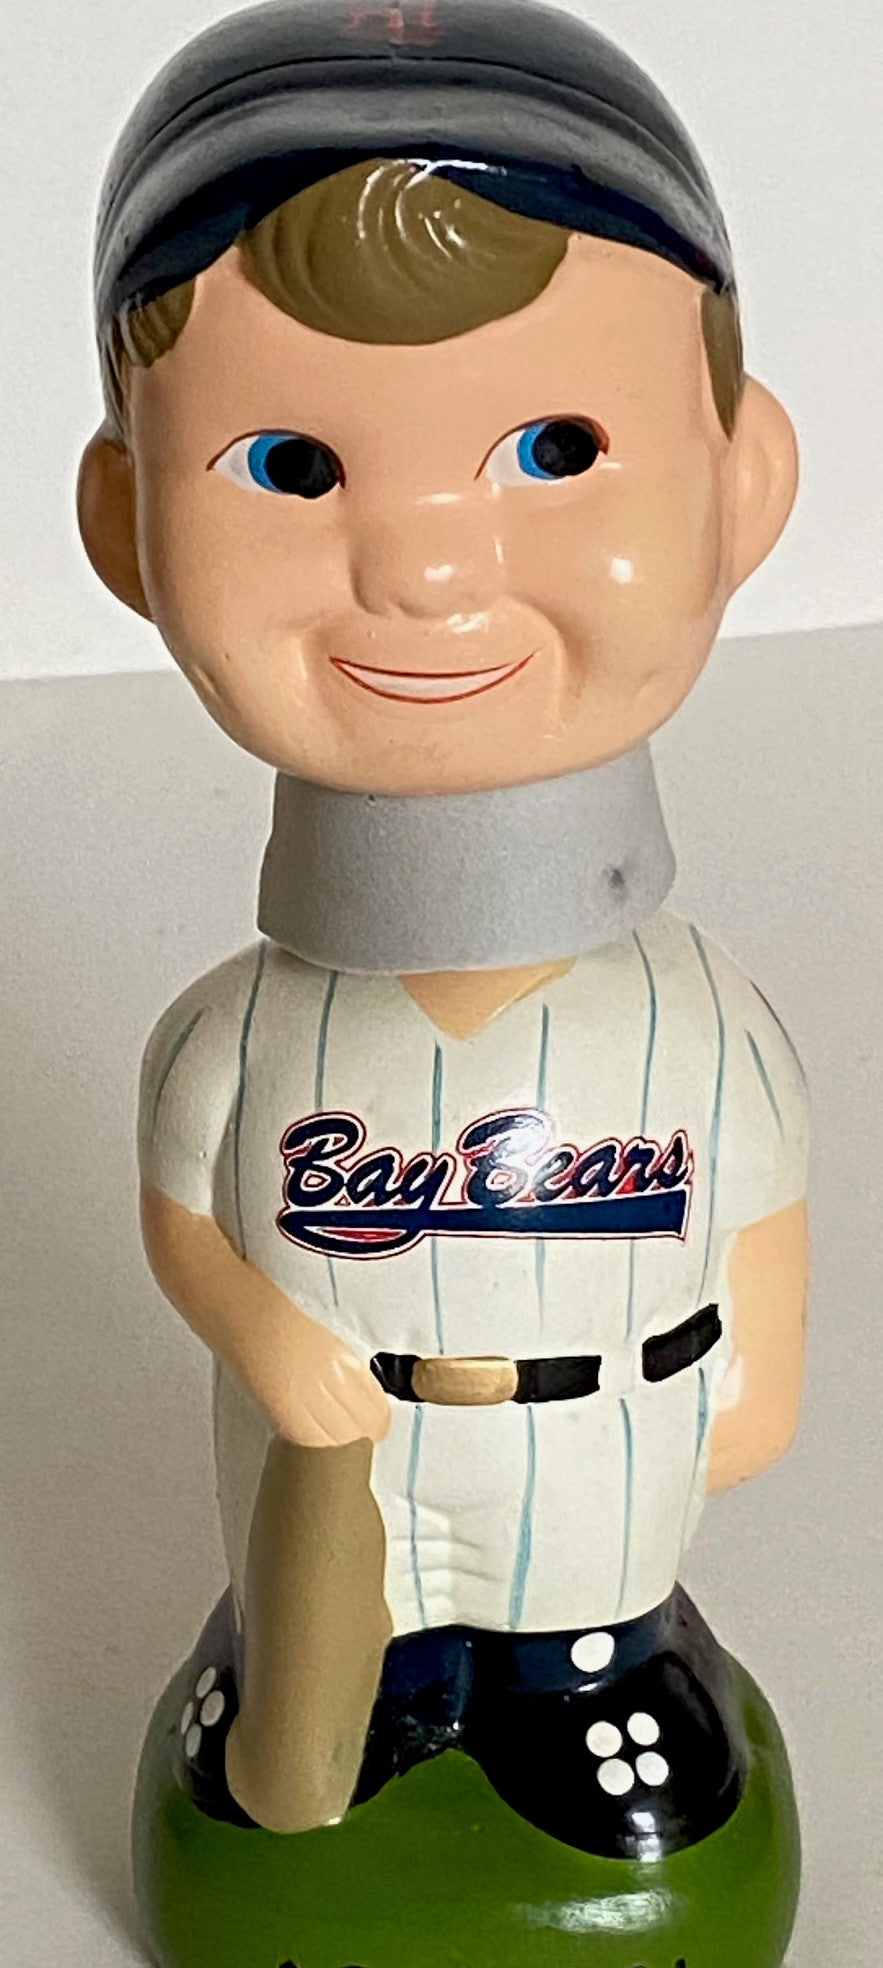 Mobile BayBears 1999  Minor League Bobblehead (Used) by Twins Enterprise